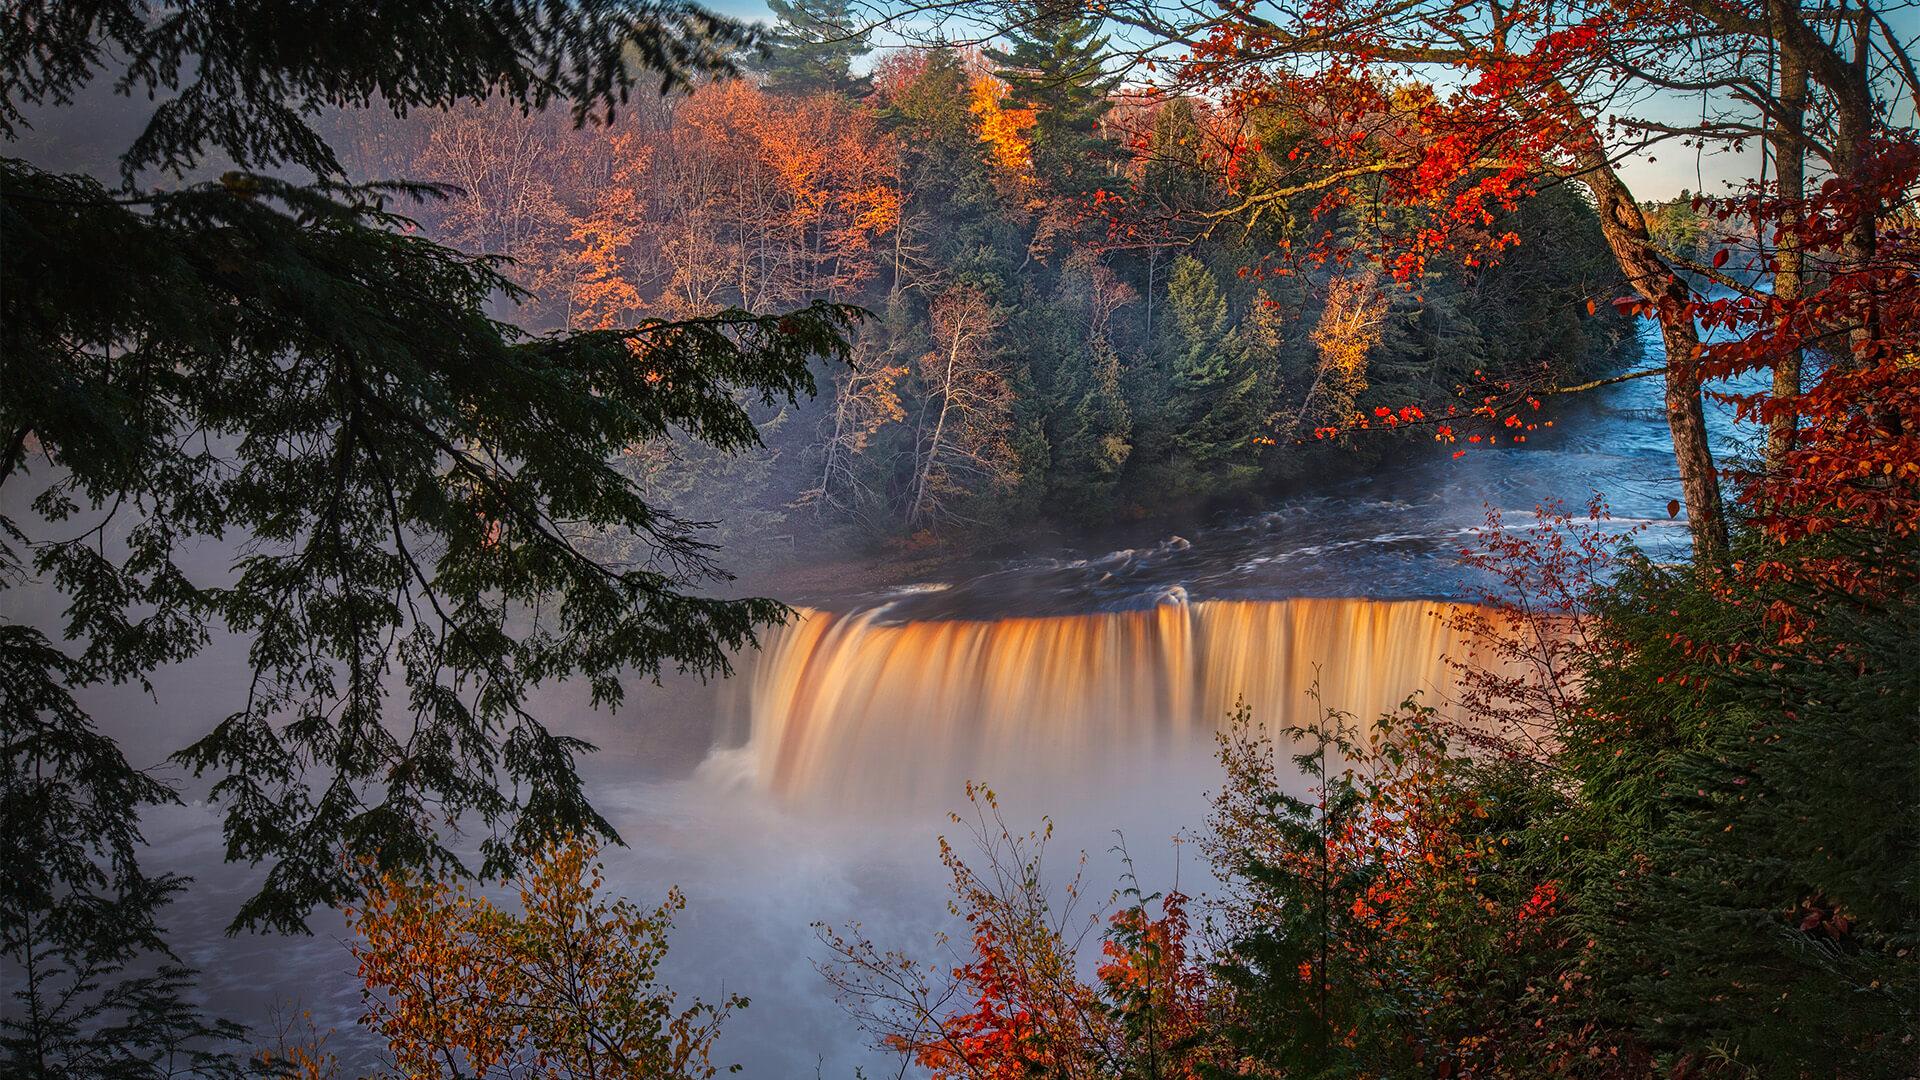 Upper Tahquamenon Falls surrounded by autumnal trees